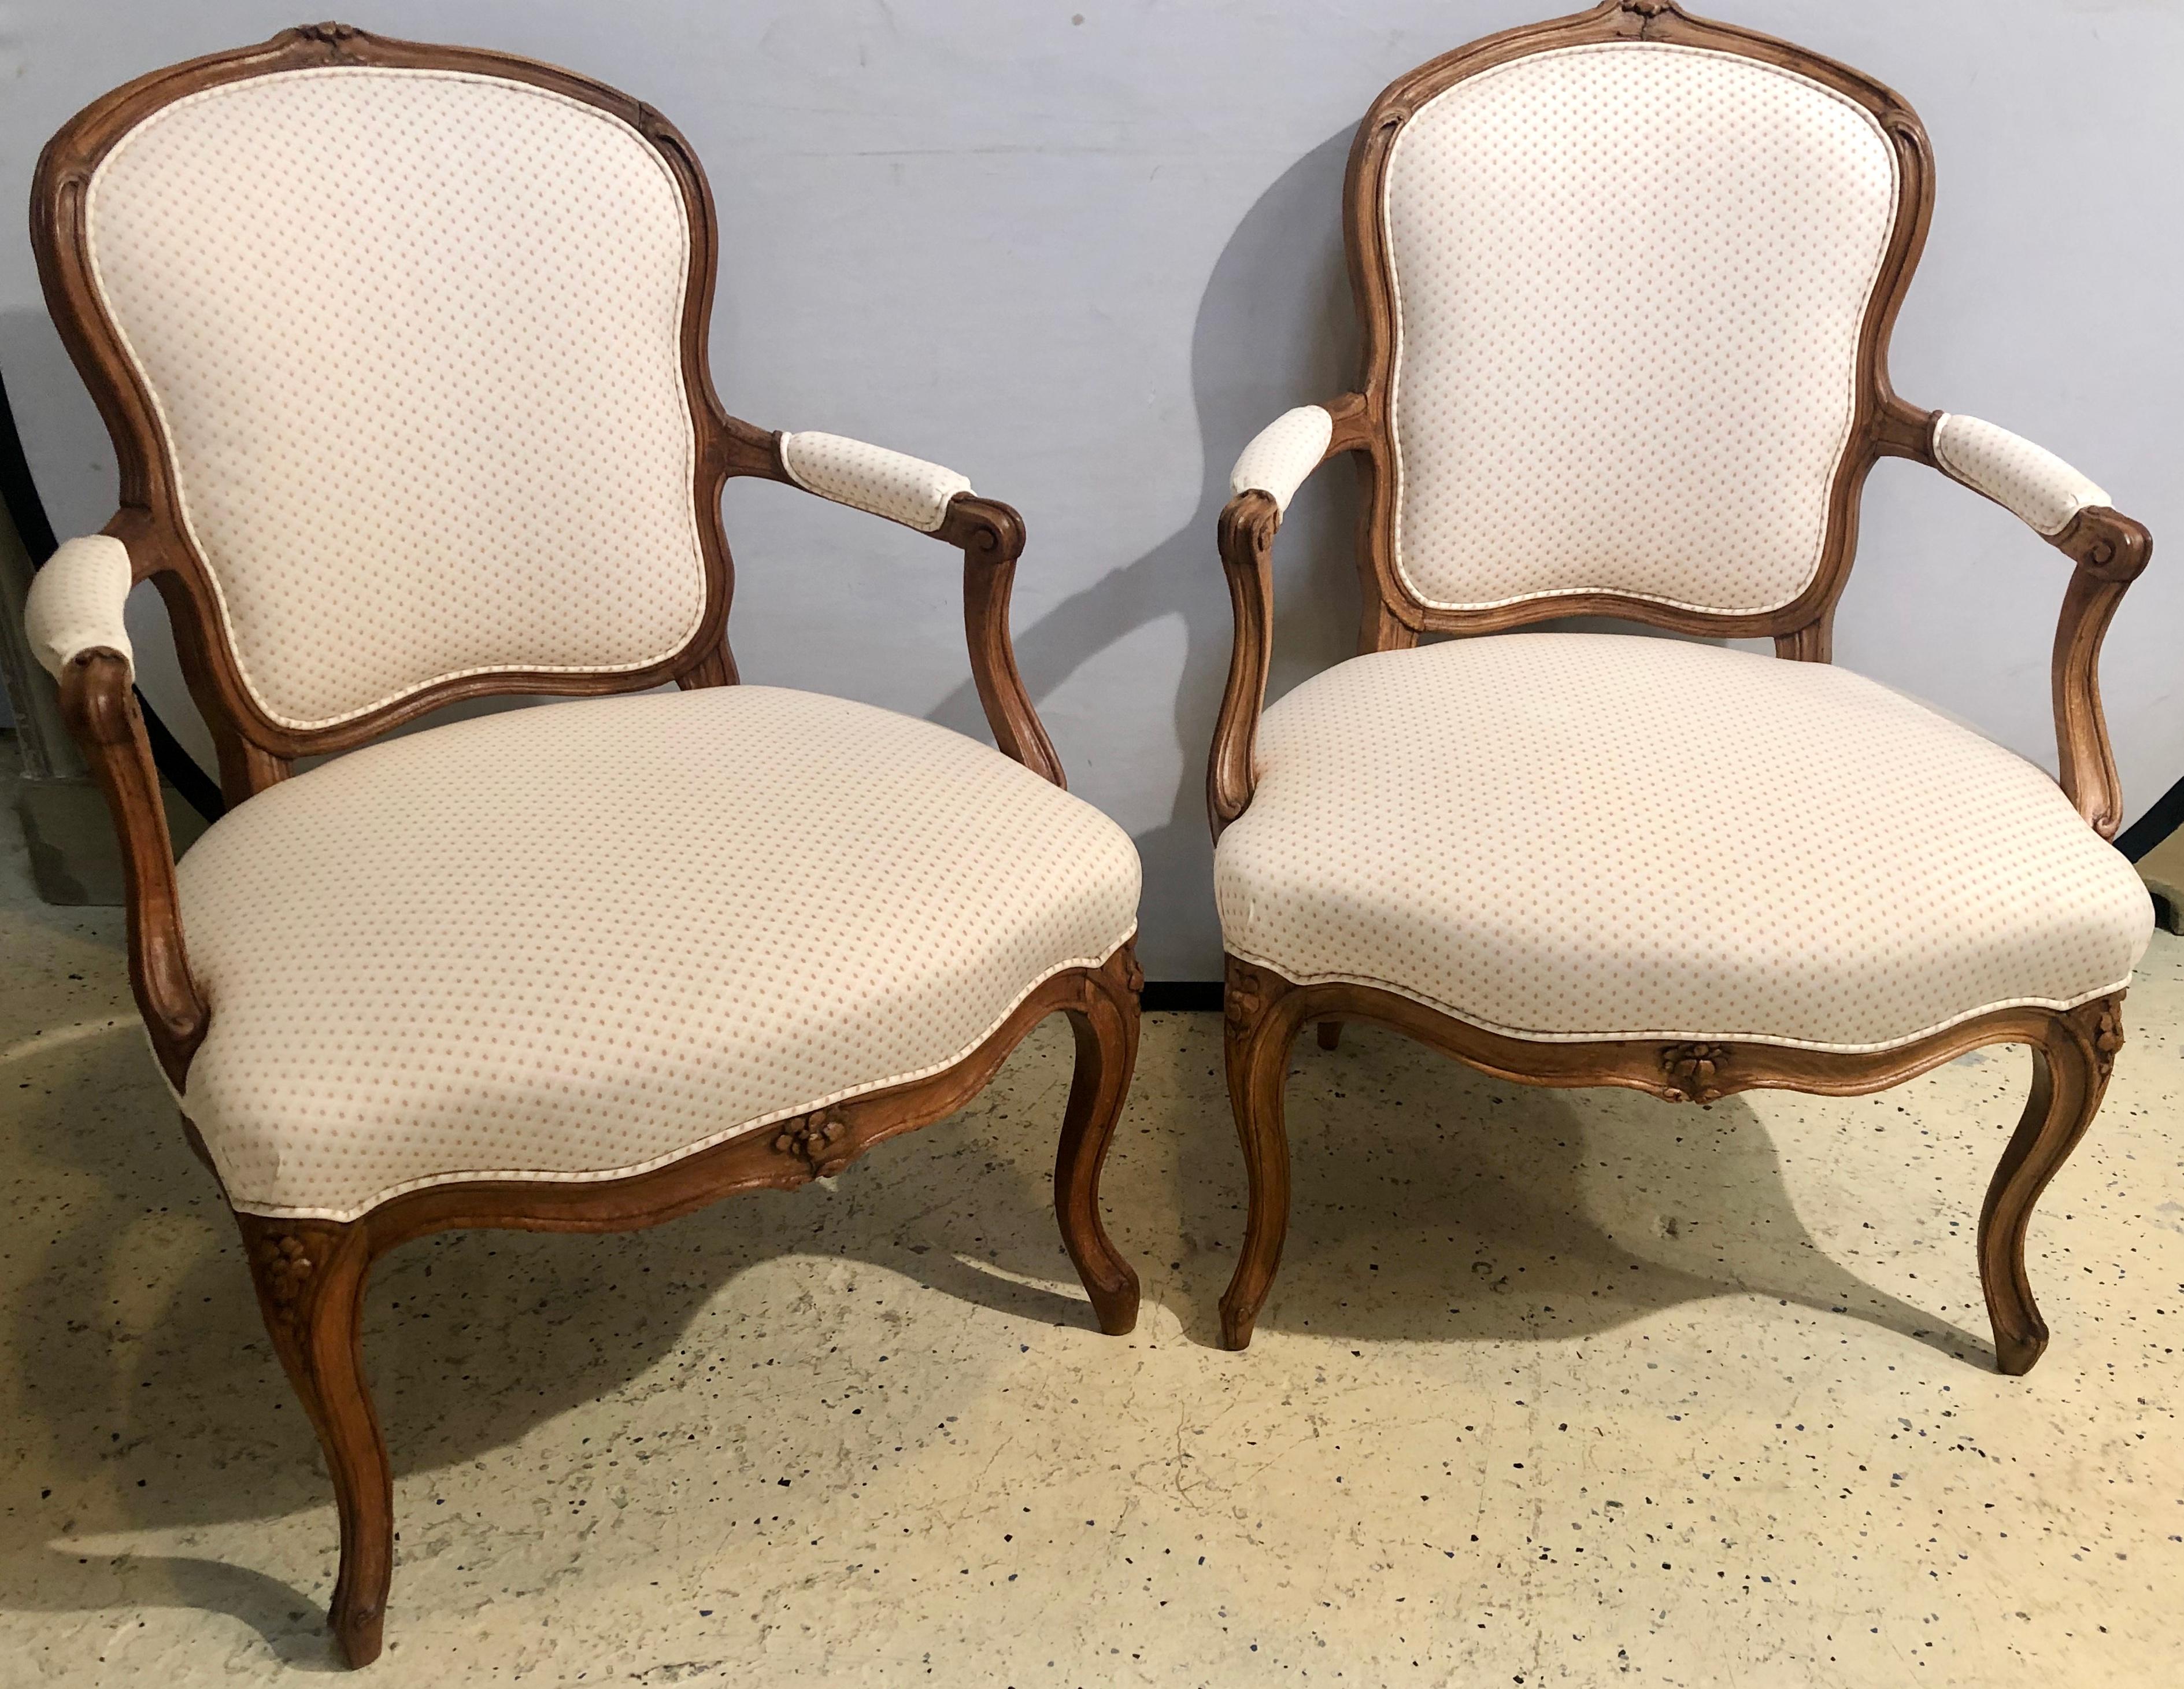 18th century pair of beechwood fauteuils or armchairs with provenance. There are a total of four of these finely carved and upholstered fauteuils or arm chairs available. This listing is for one pair only. Each in fine strong sturdy condition with